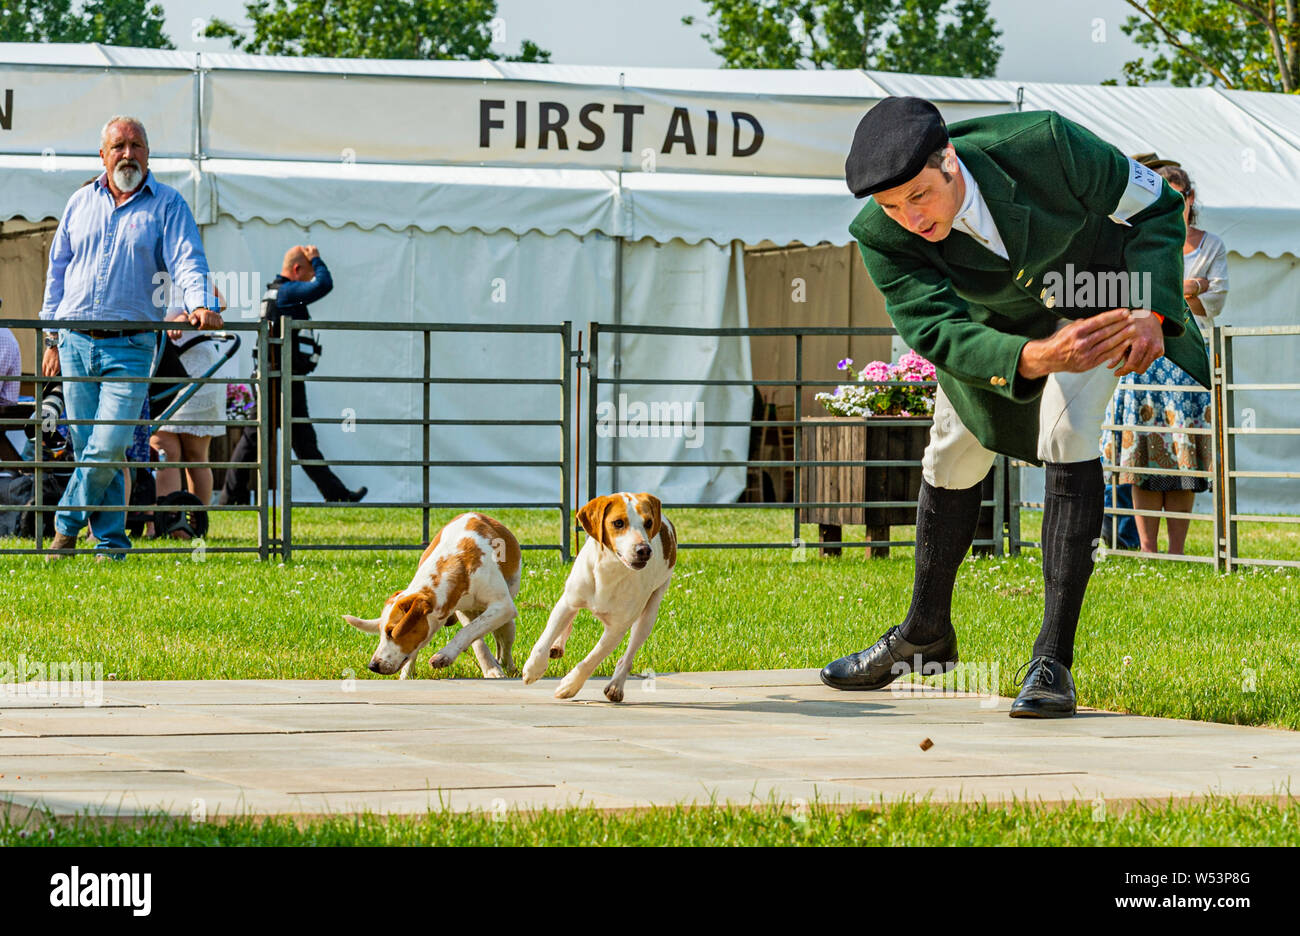 Festival of Hunting, Peterborough. The Huntsman with two beagle hounds in the show ring Stock Photo